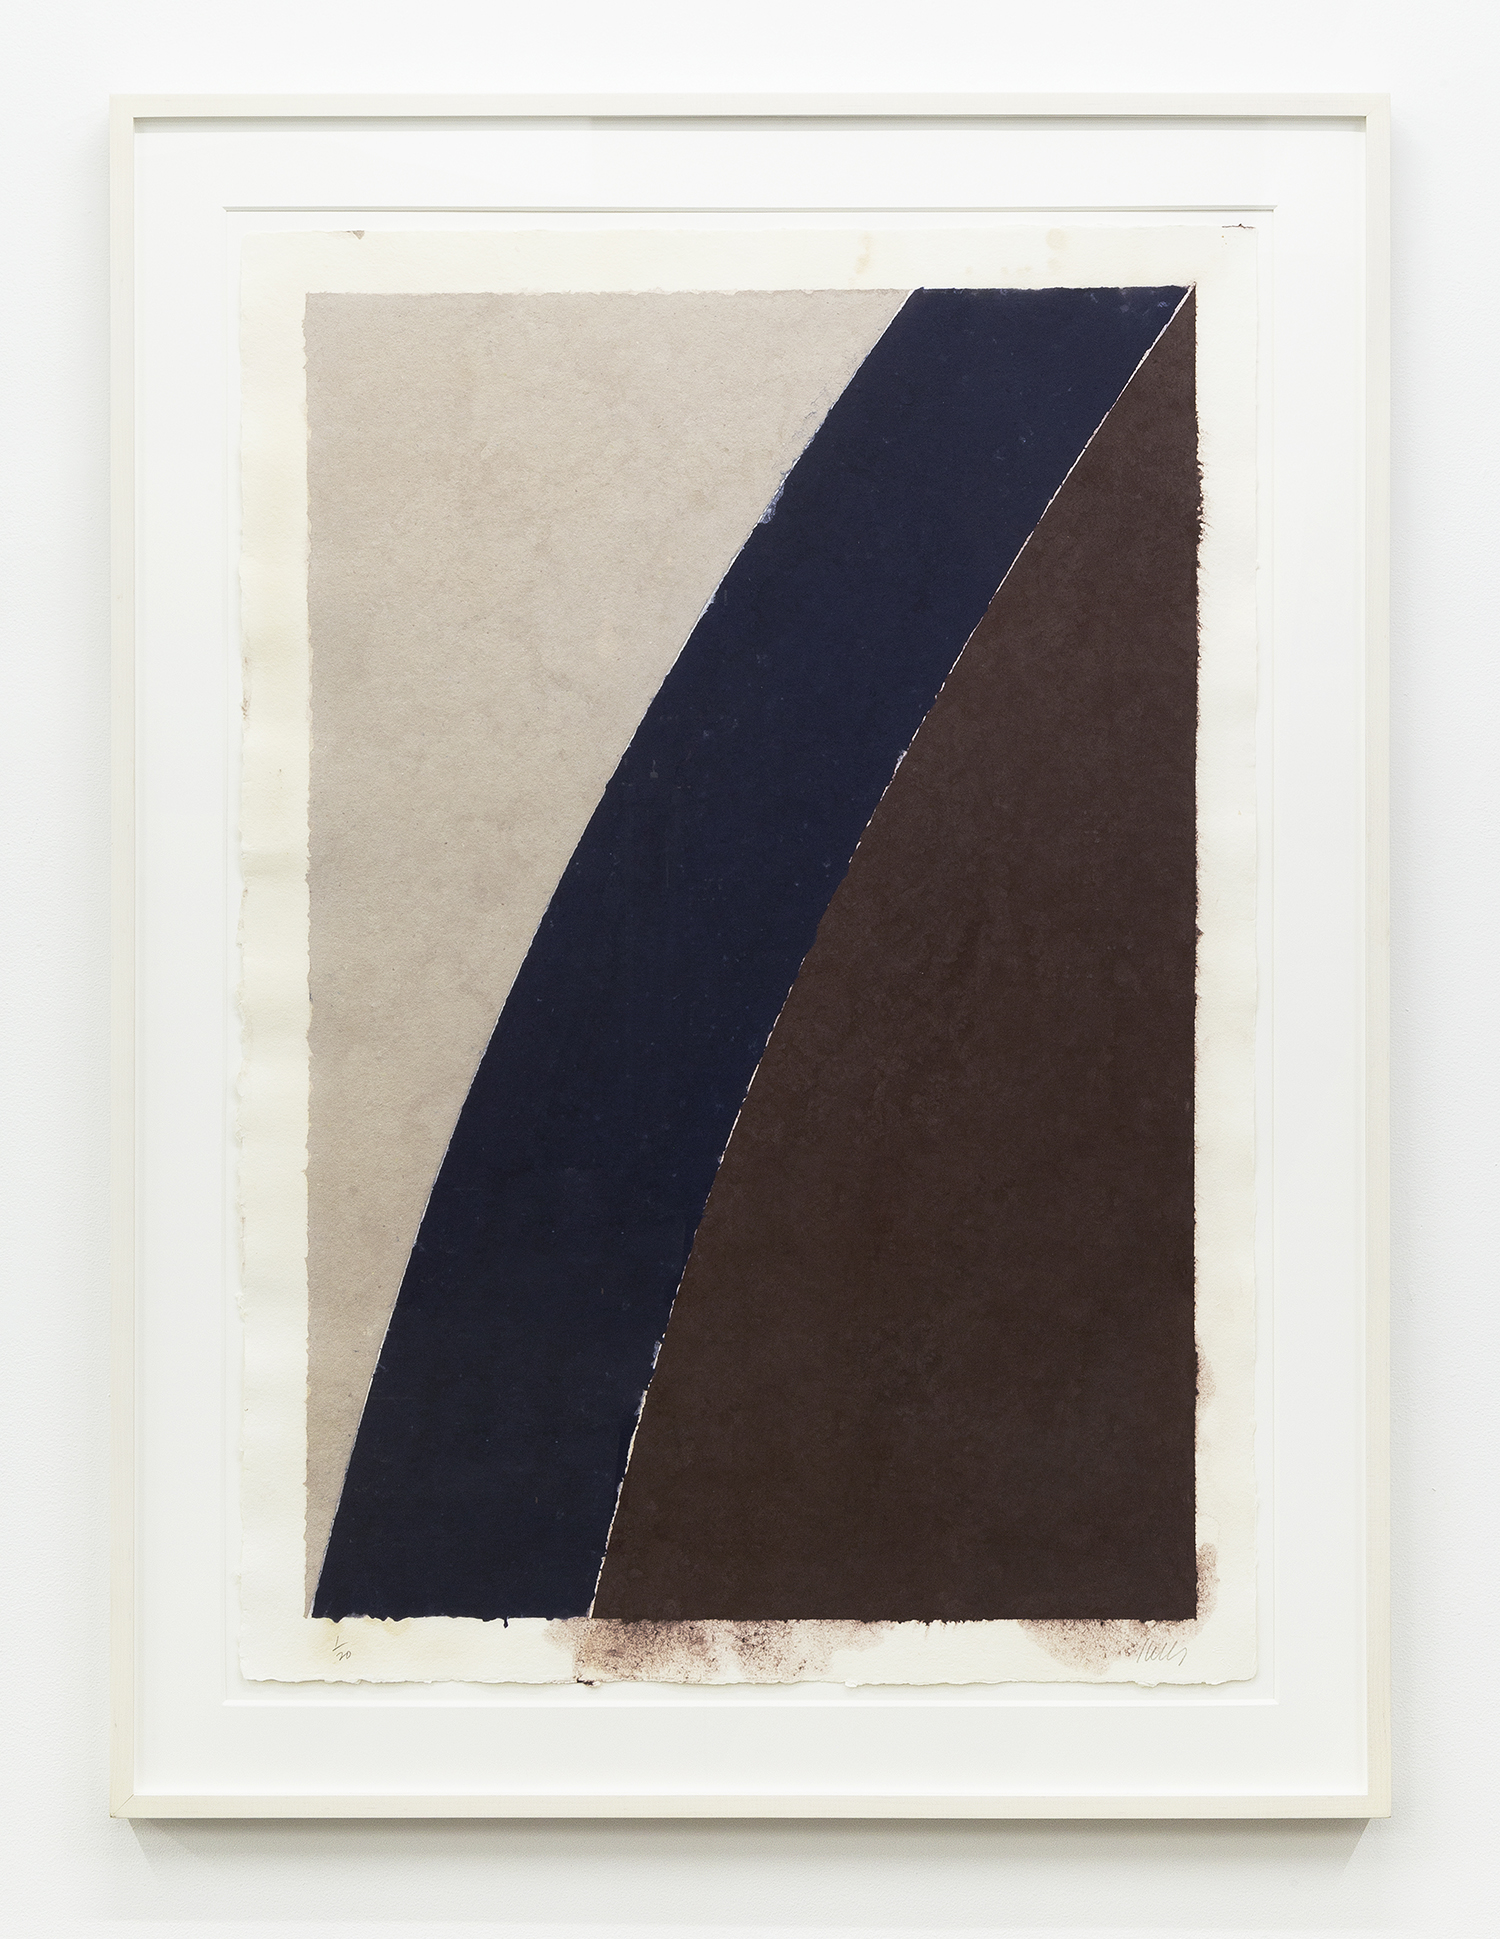 Colored Paper Image XII (Blue Curve and Gray), 1976, Colored and pressed paper pulp, 45 7/8 x 32 1/16 inches (116.5 x 81.4 cm), Edition of 20